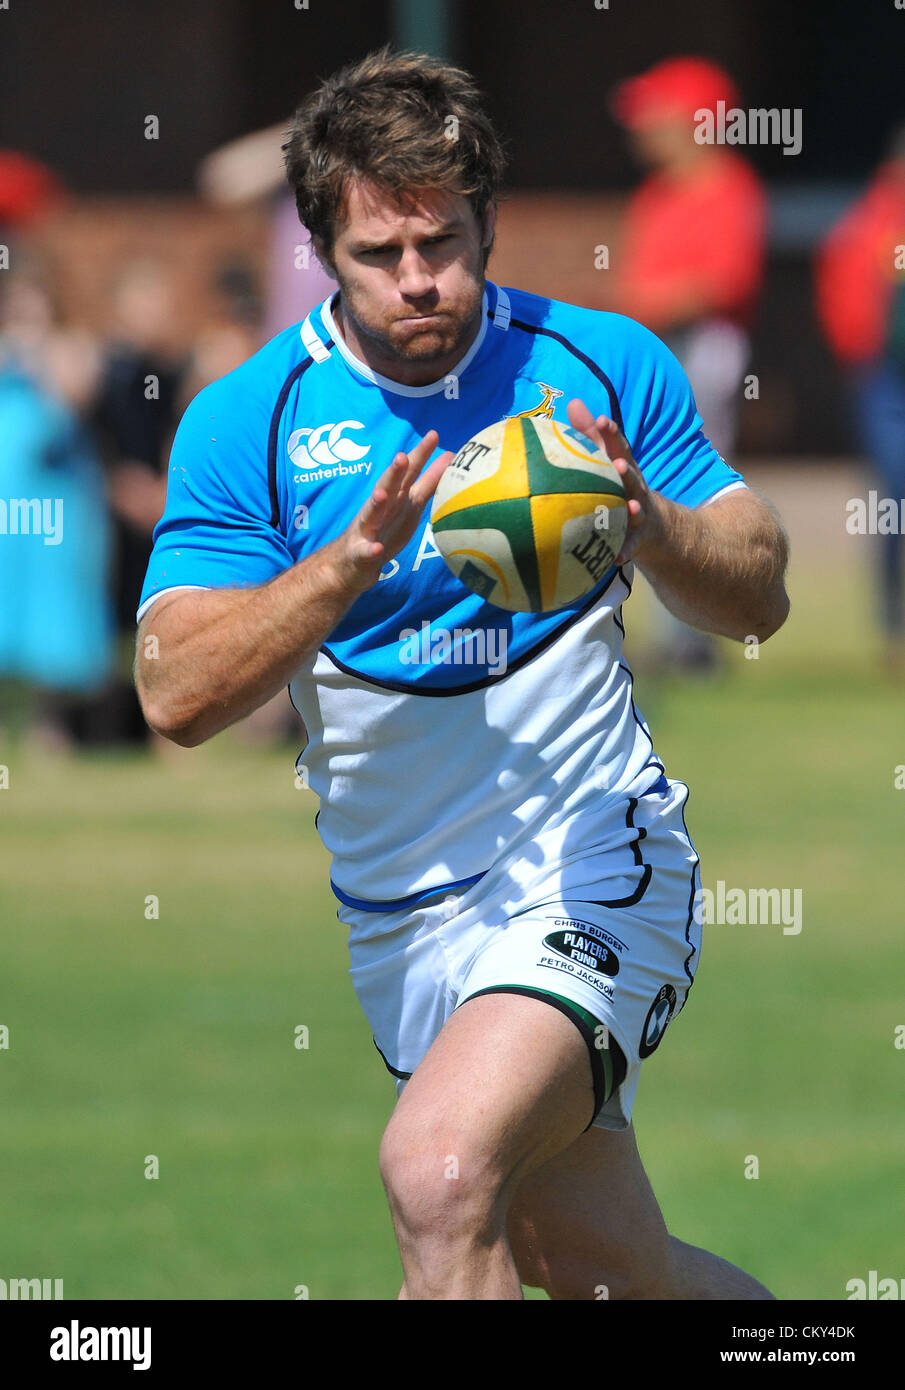 JOHANNESBURG, SOUTH AFRICA - SEPTEMBER 01, Craig Burden receives the pass during the South African national rugby team field session and media conference at KES on September 01, 2012 in Johannesburg, South Africa Photo by Duif du Toit / Gallo Images Stock Photo